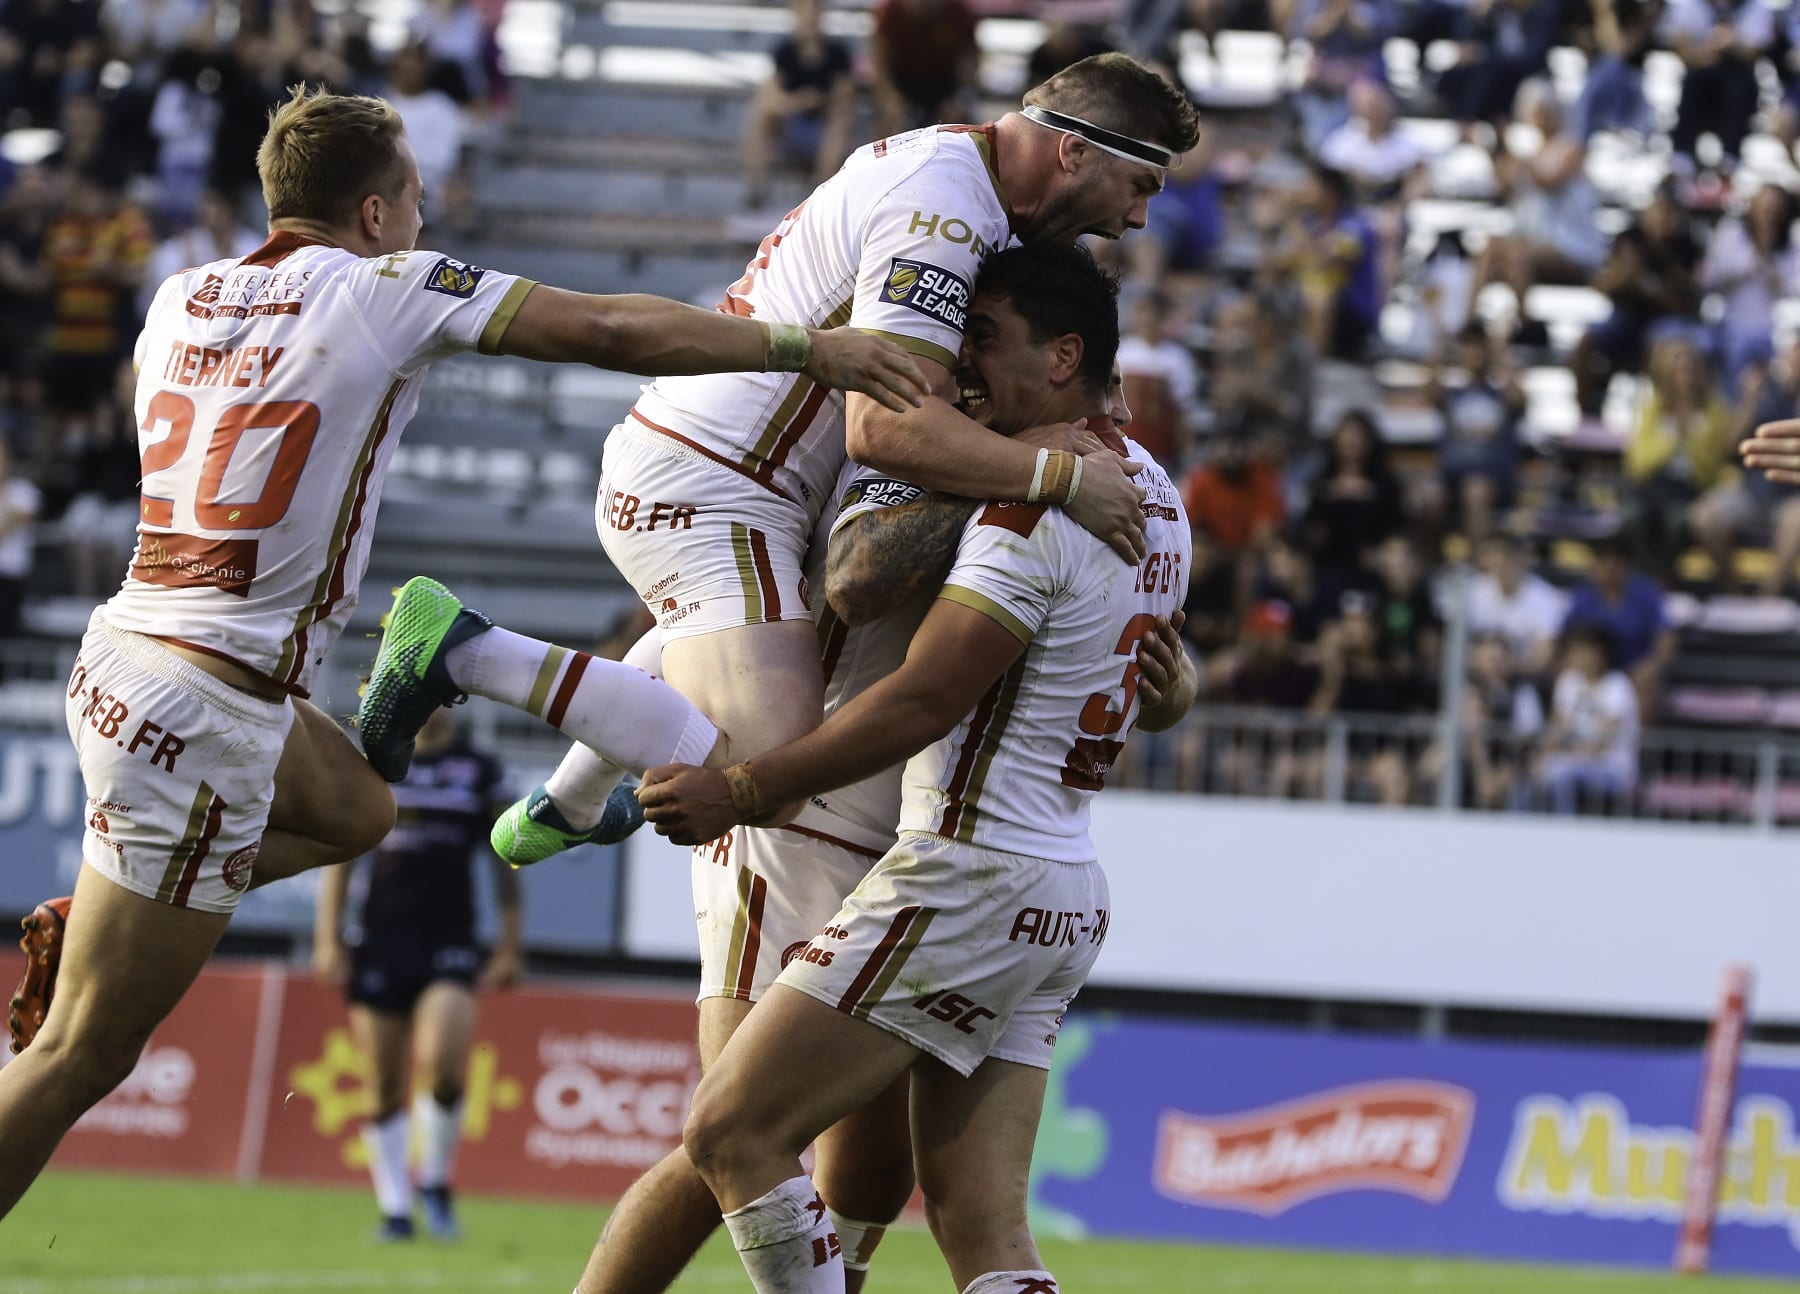 How To Plan Your Training | Tips From The Catalans Dragons Coach